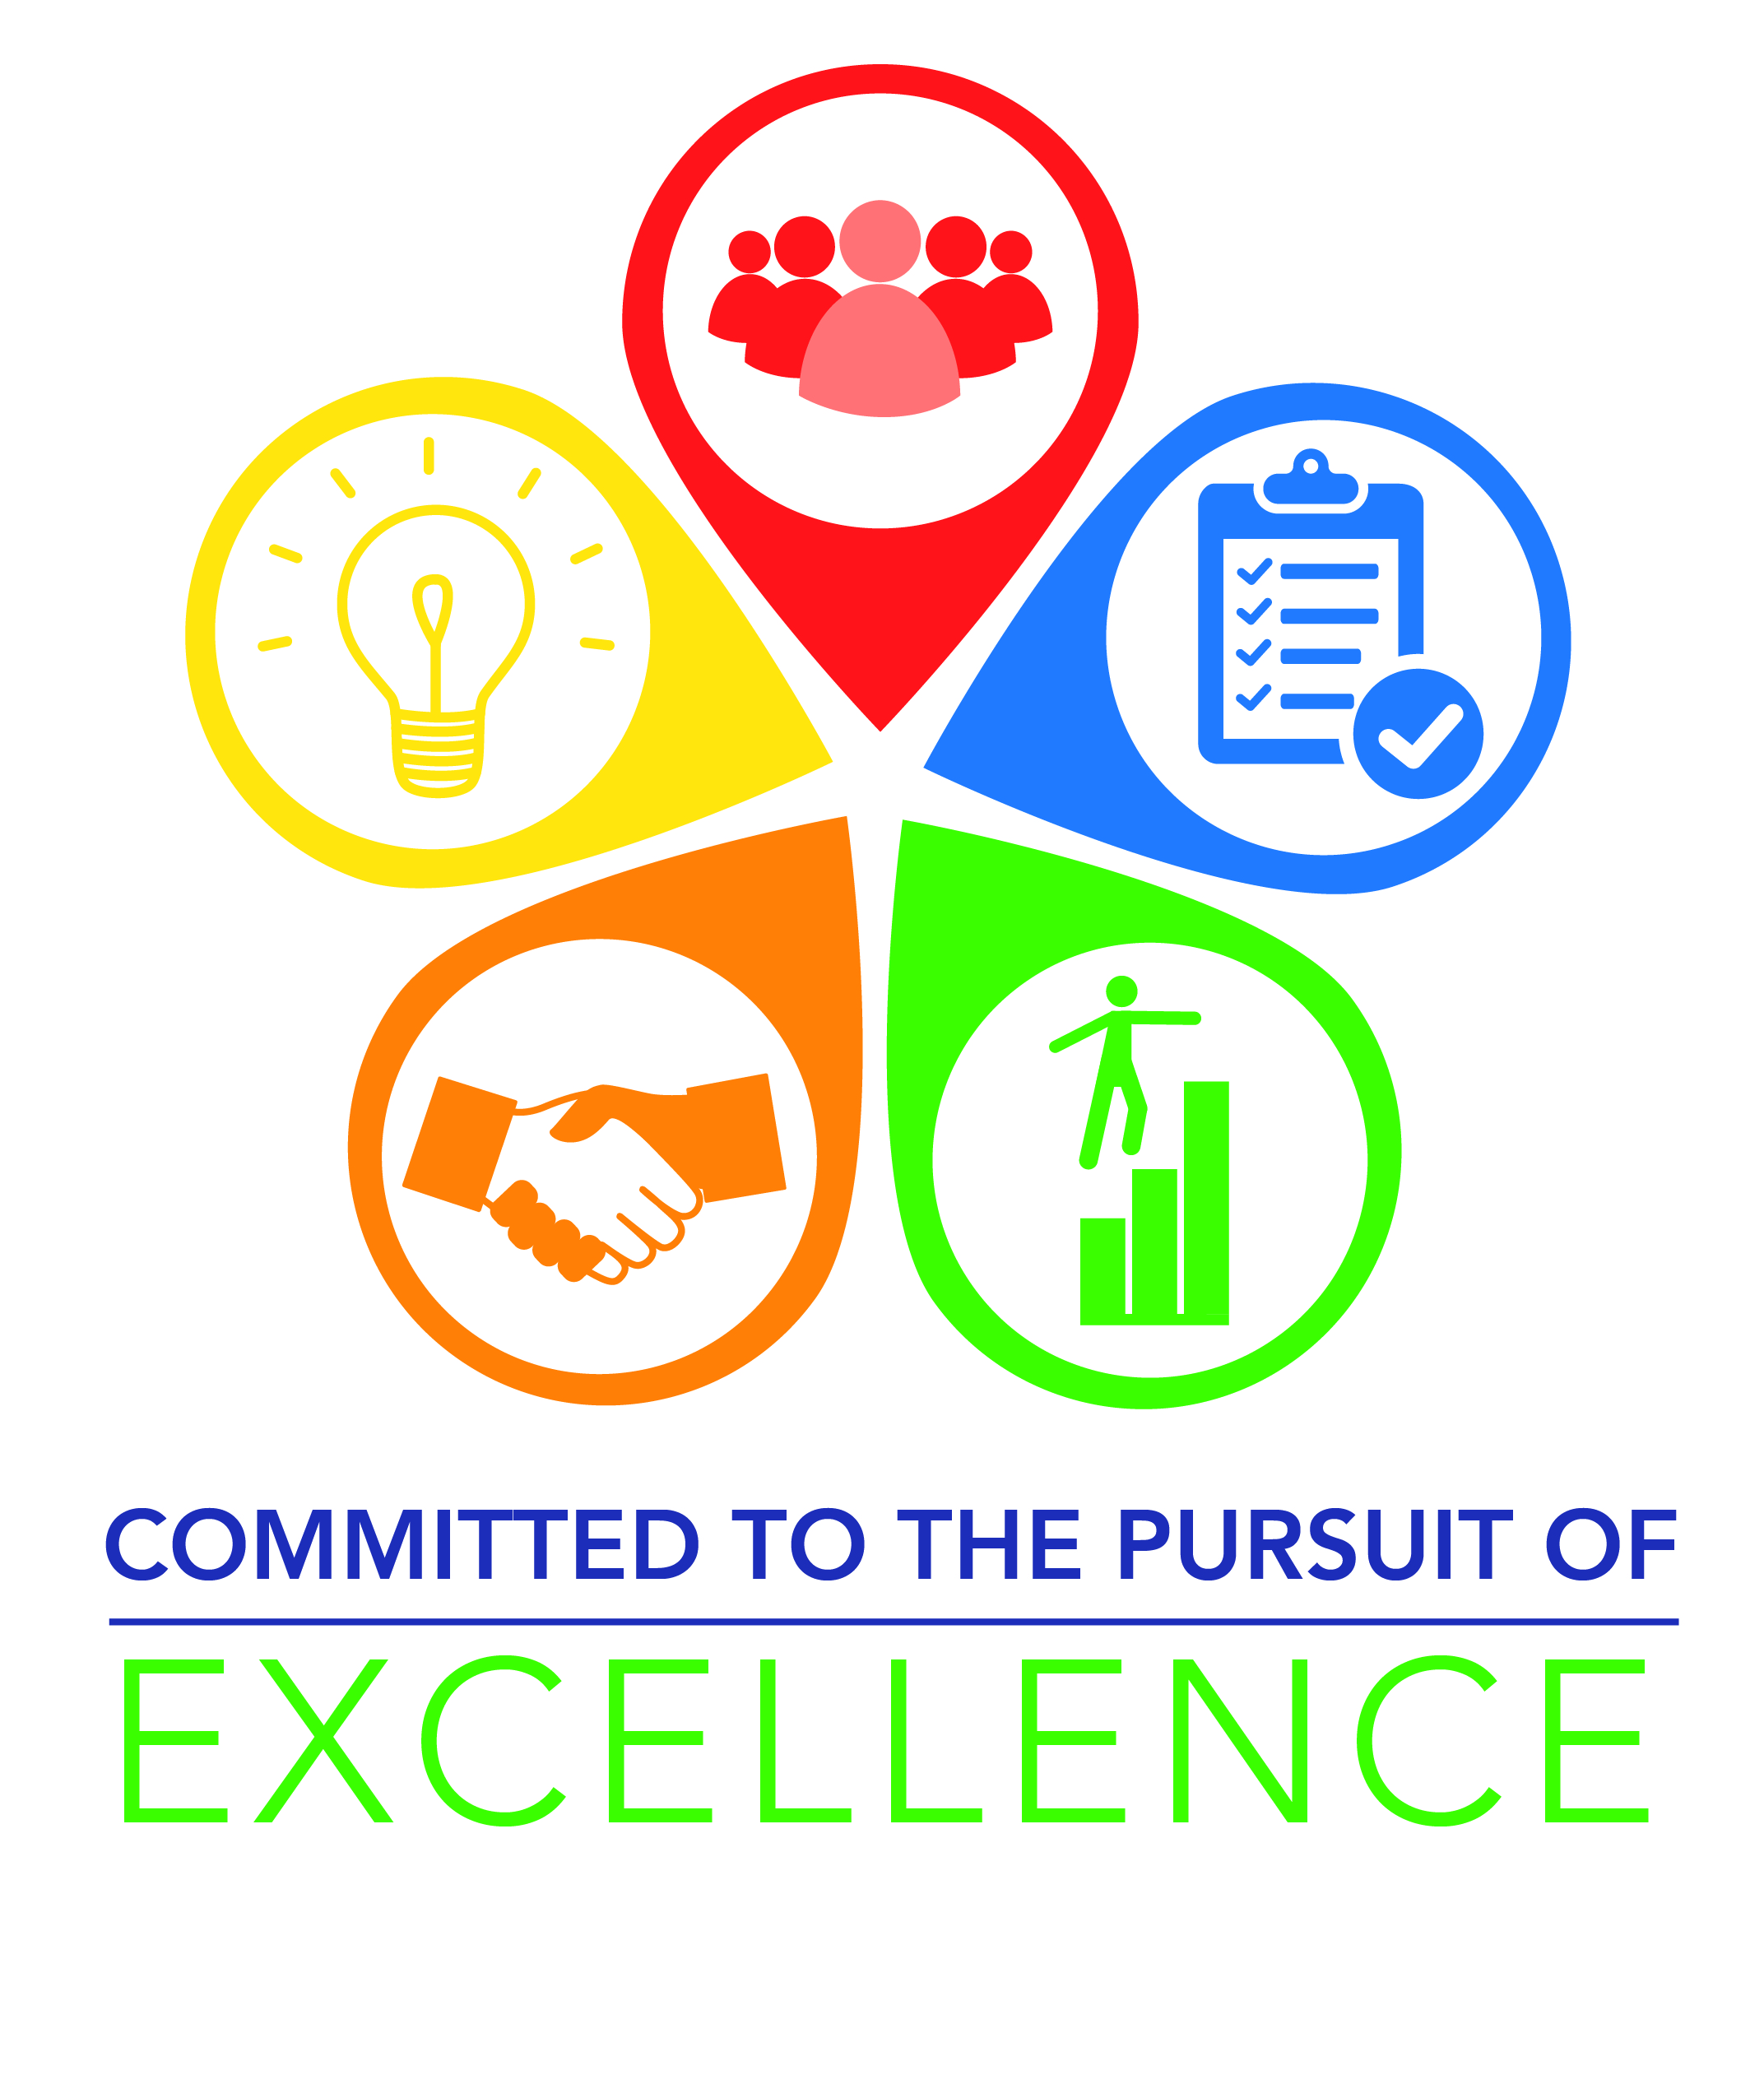 Council's vision - Committed to the pursuit of excellence